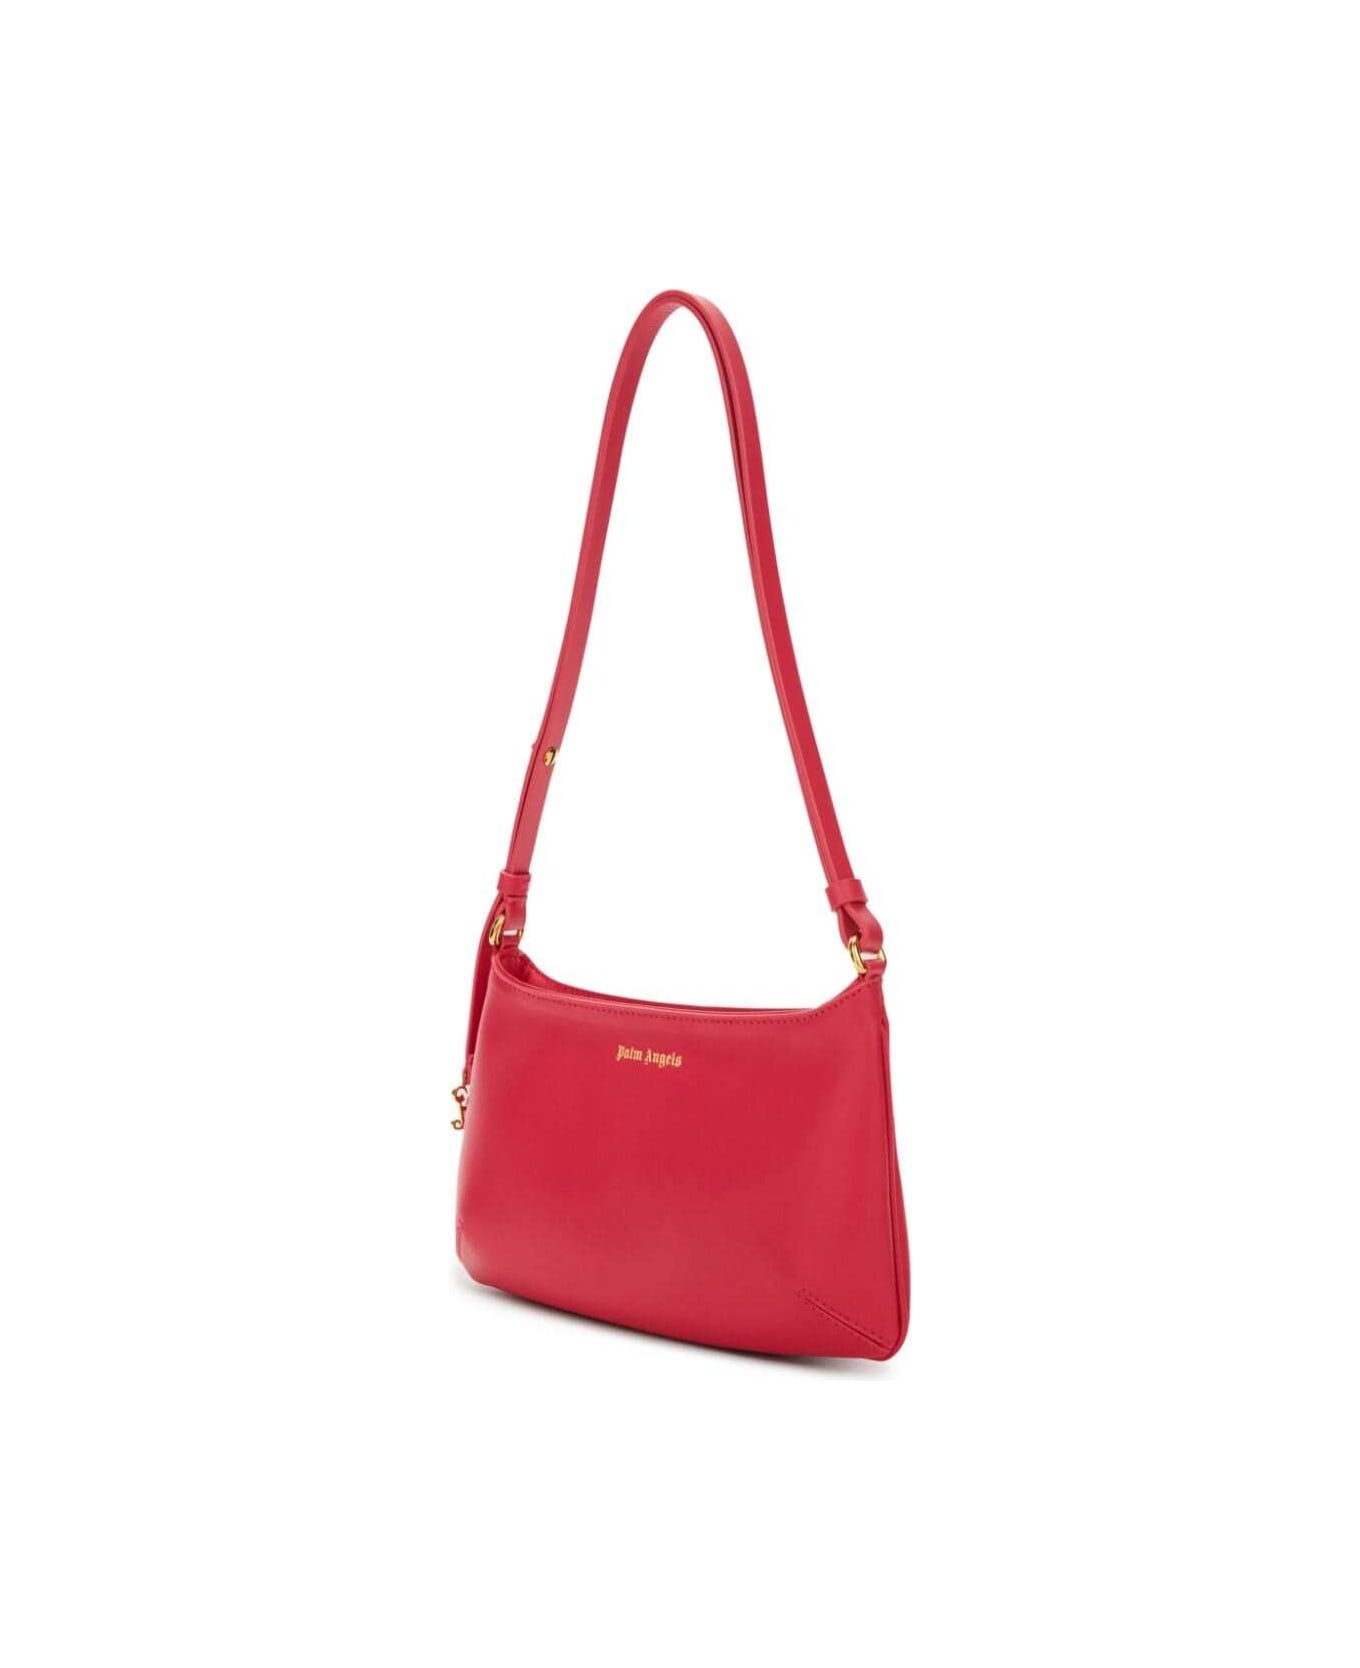 Palm Angels Lategram Bag Love Potion Gold - Red